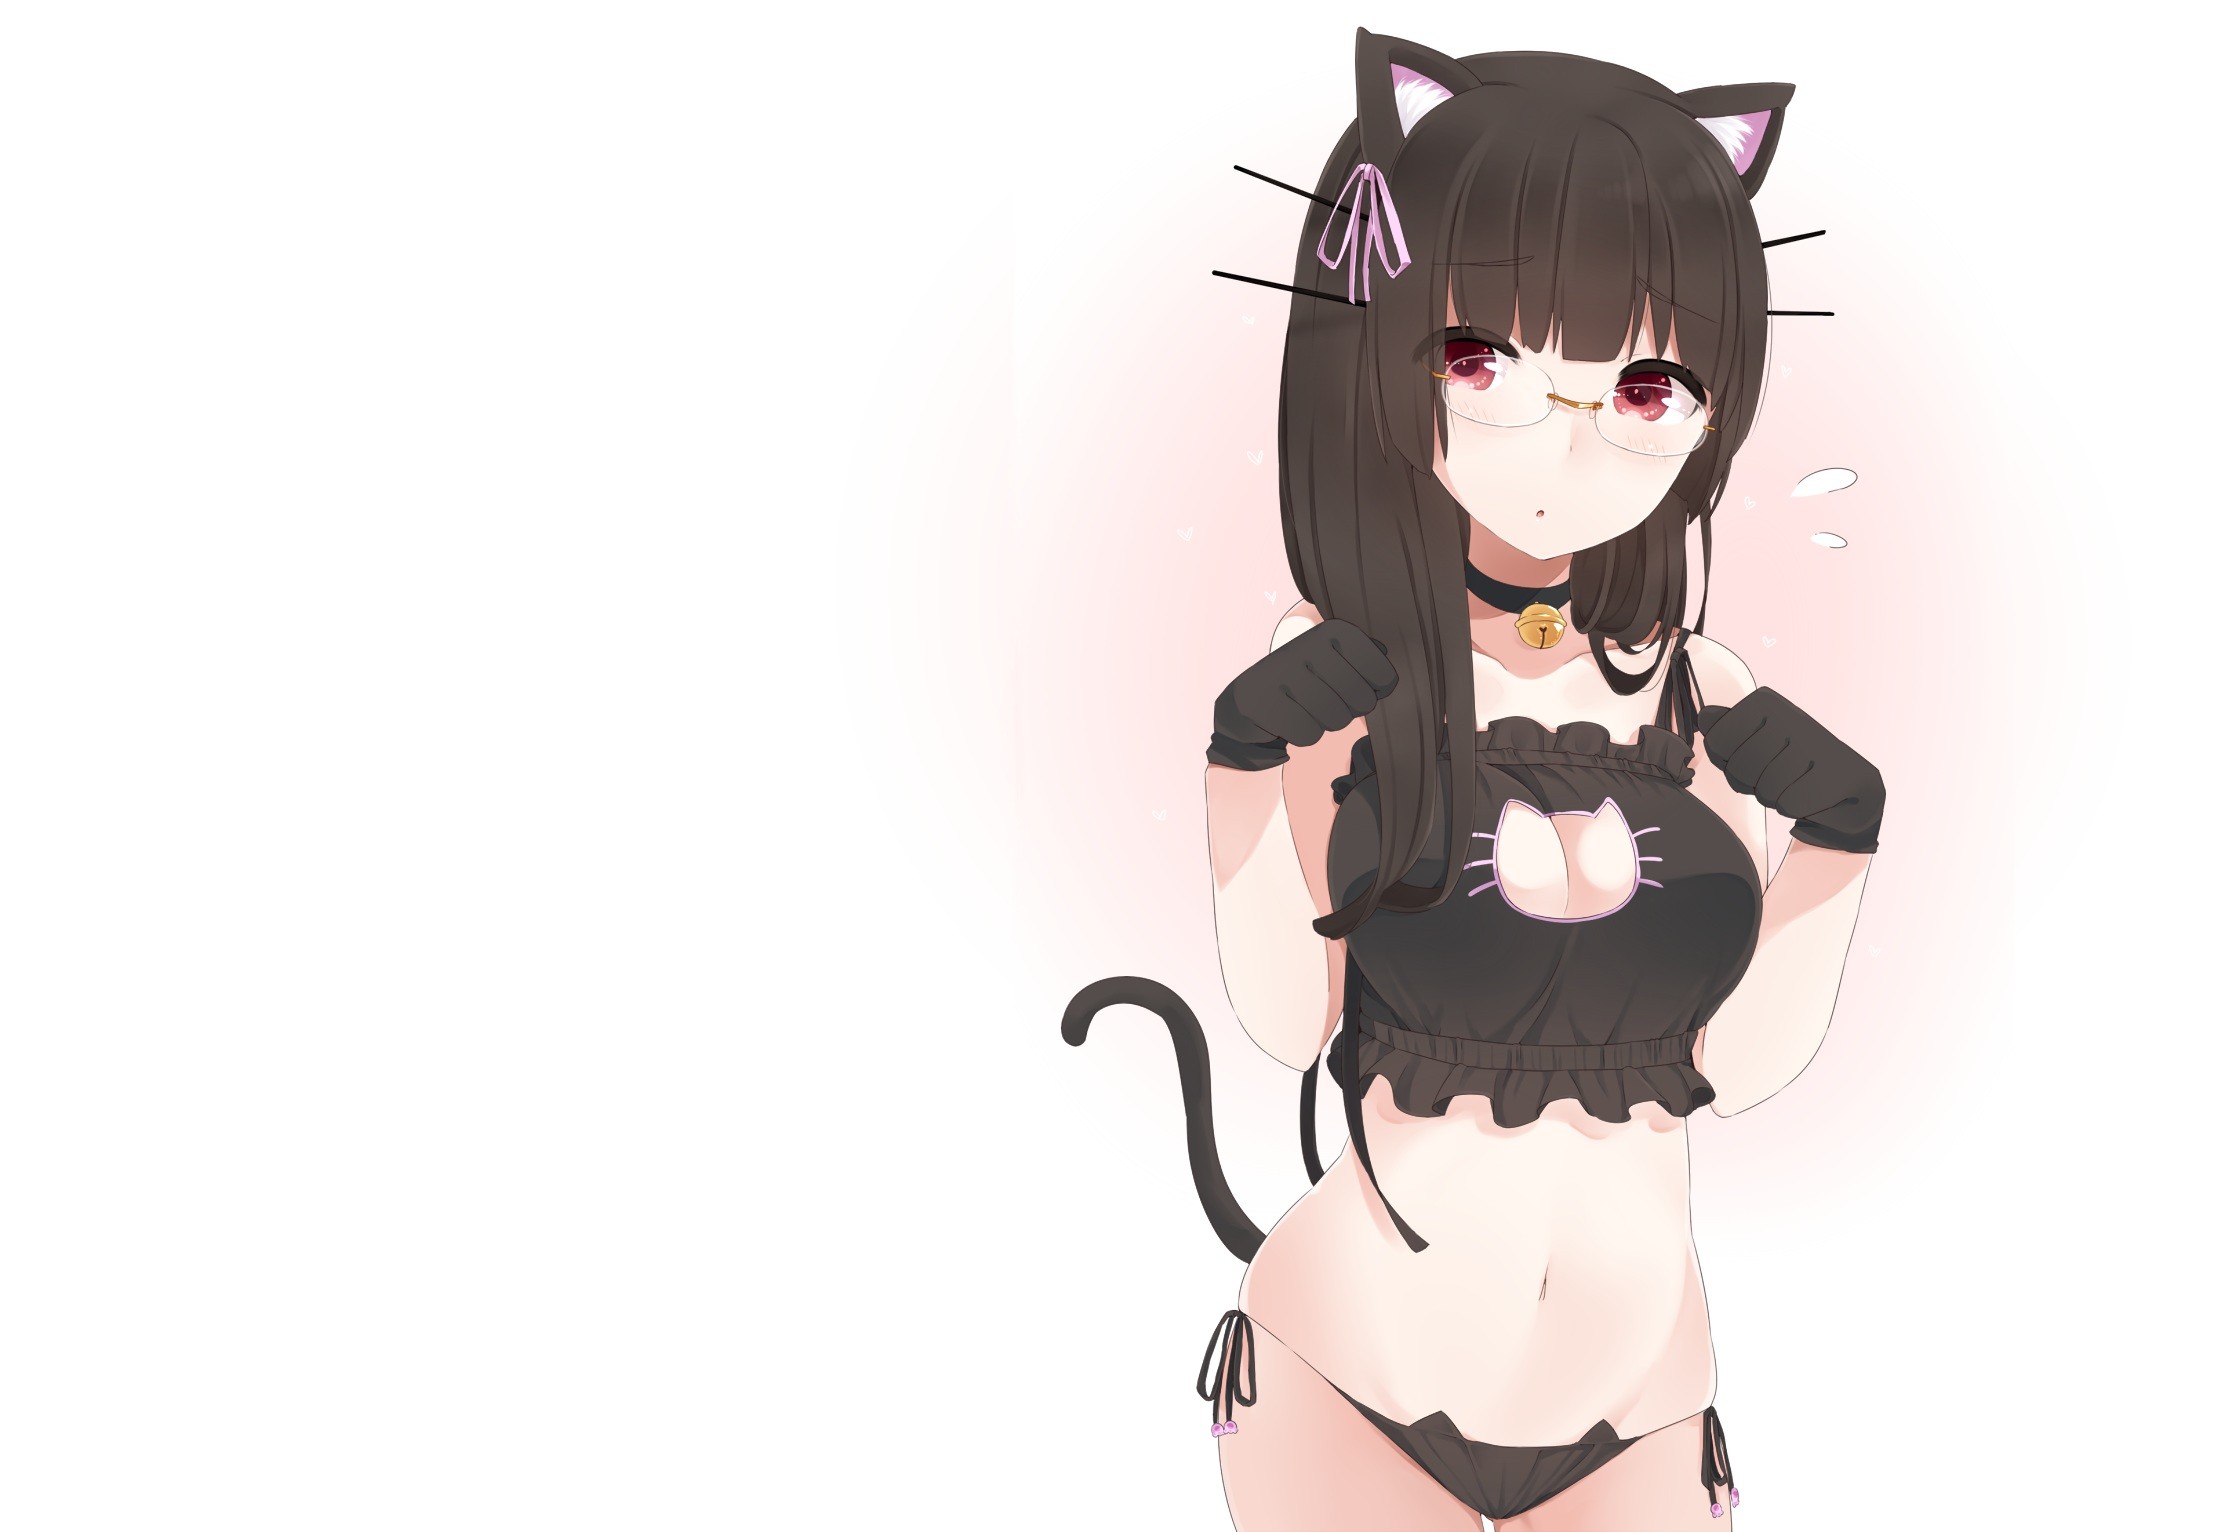 Anime 2220x1532 anime anime girls long hair cat girl Kantai Collection Choukai (KanColle) cat keyhole bra glasses boobs belly tail fist animal ears simple background Pixiv women with glasses lingerie